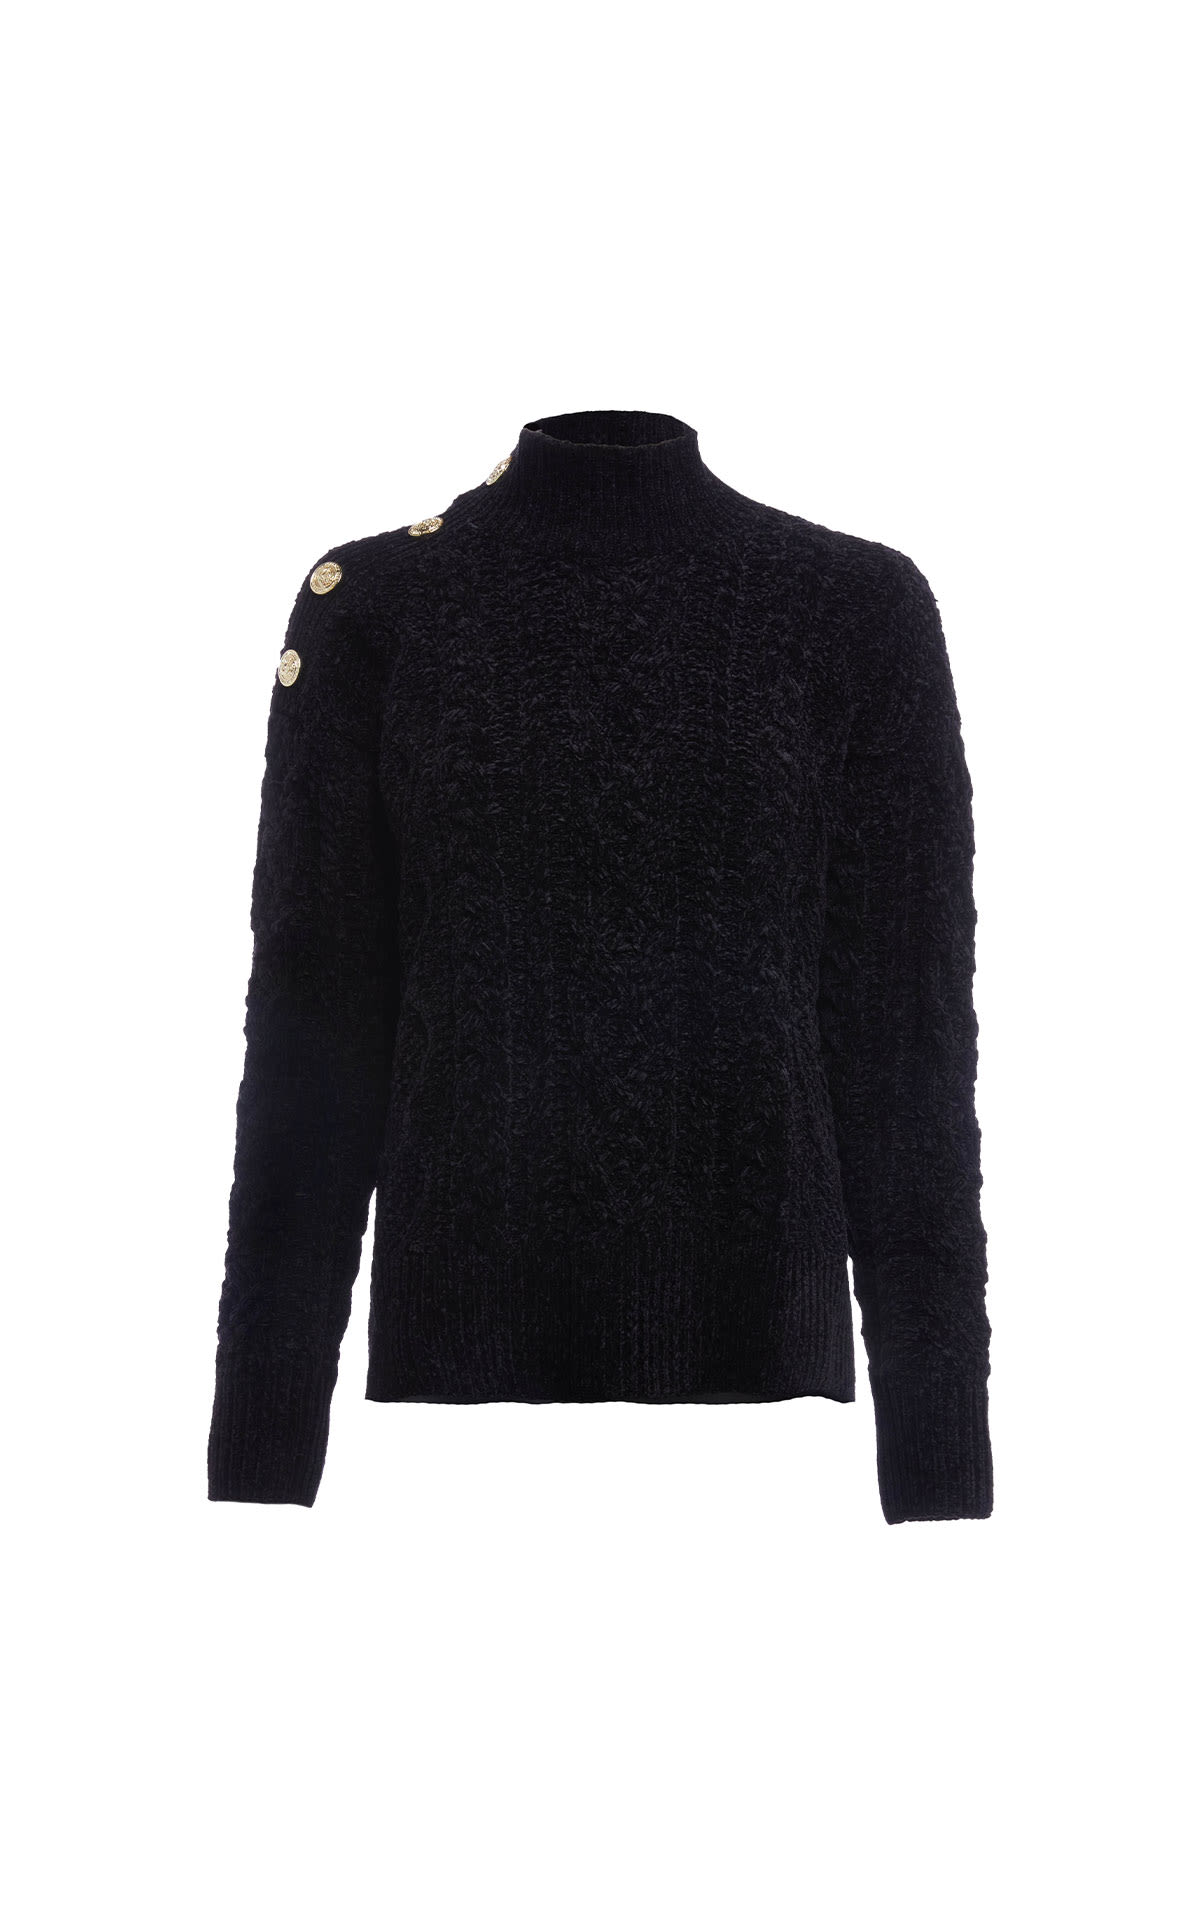 Holland Cooper Brompton cable knit black from Bicester Village